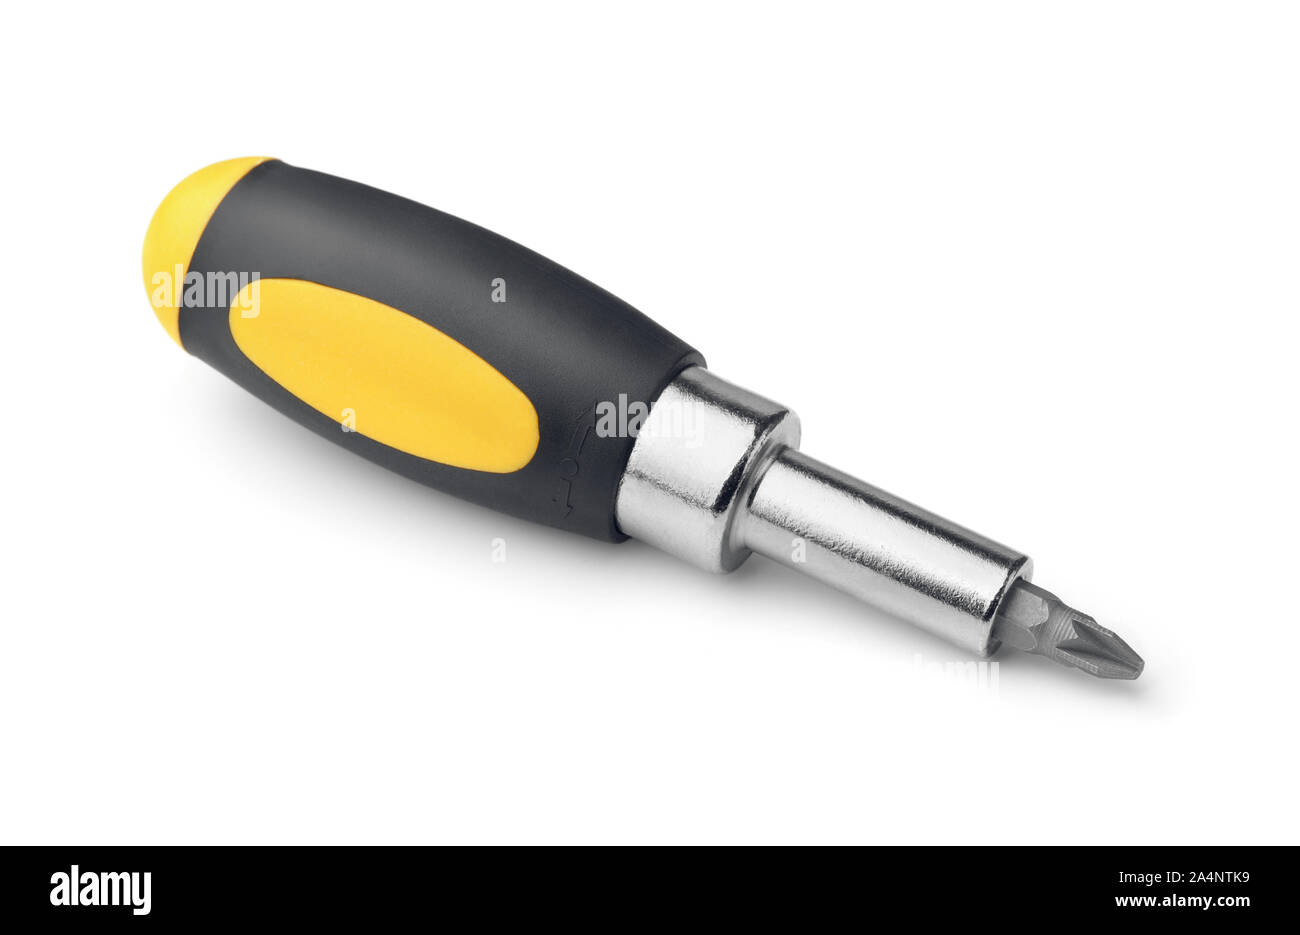 Single screwdriver with interchangeable bit isolated on white Stock Photo